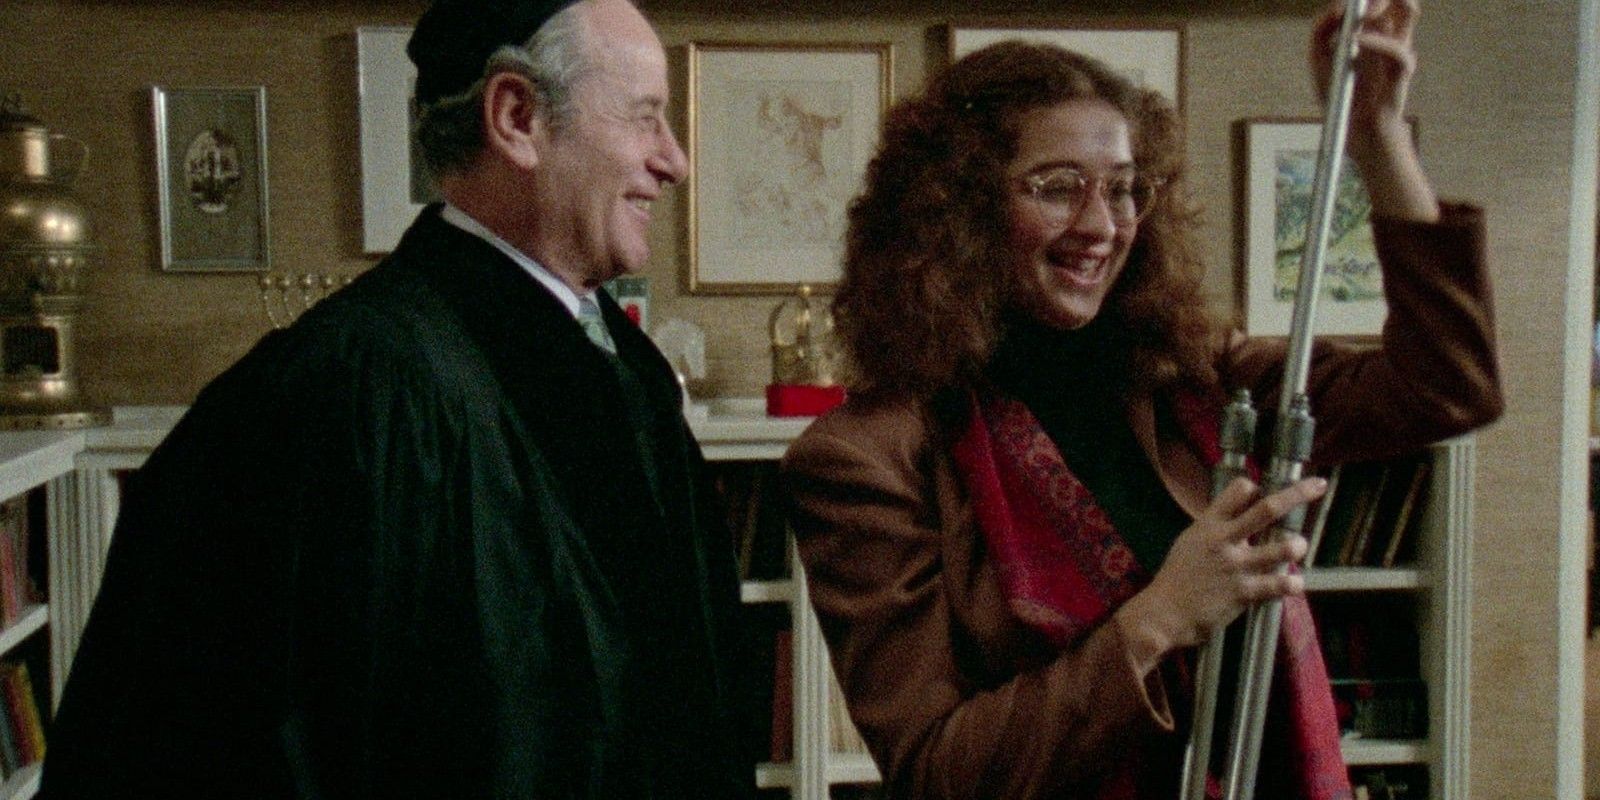 Rabbi Gold laughing with Susan in Girlfriends 1978